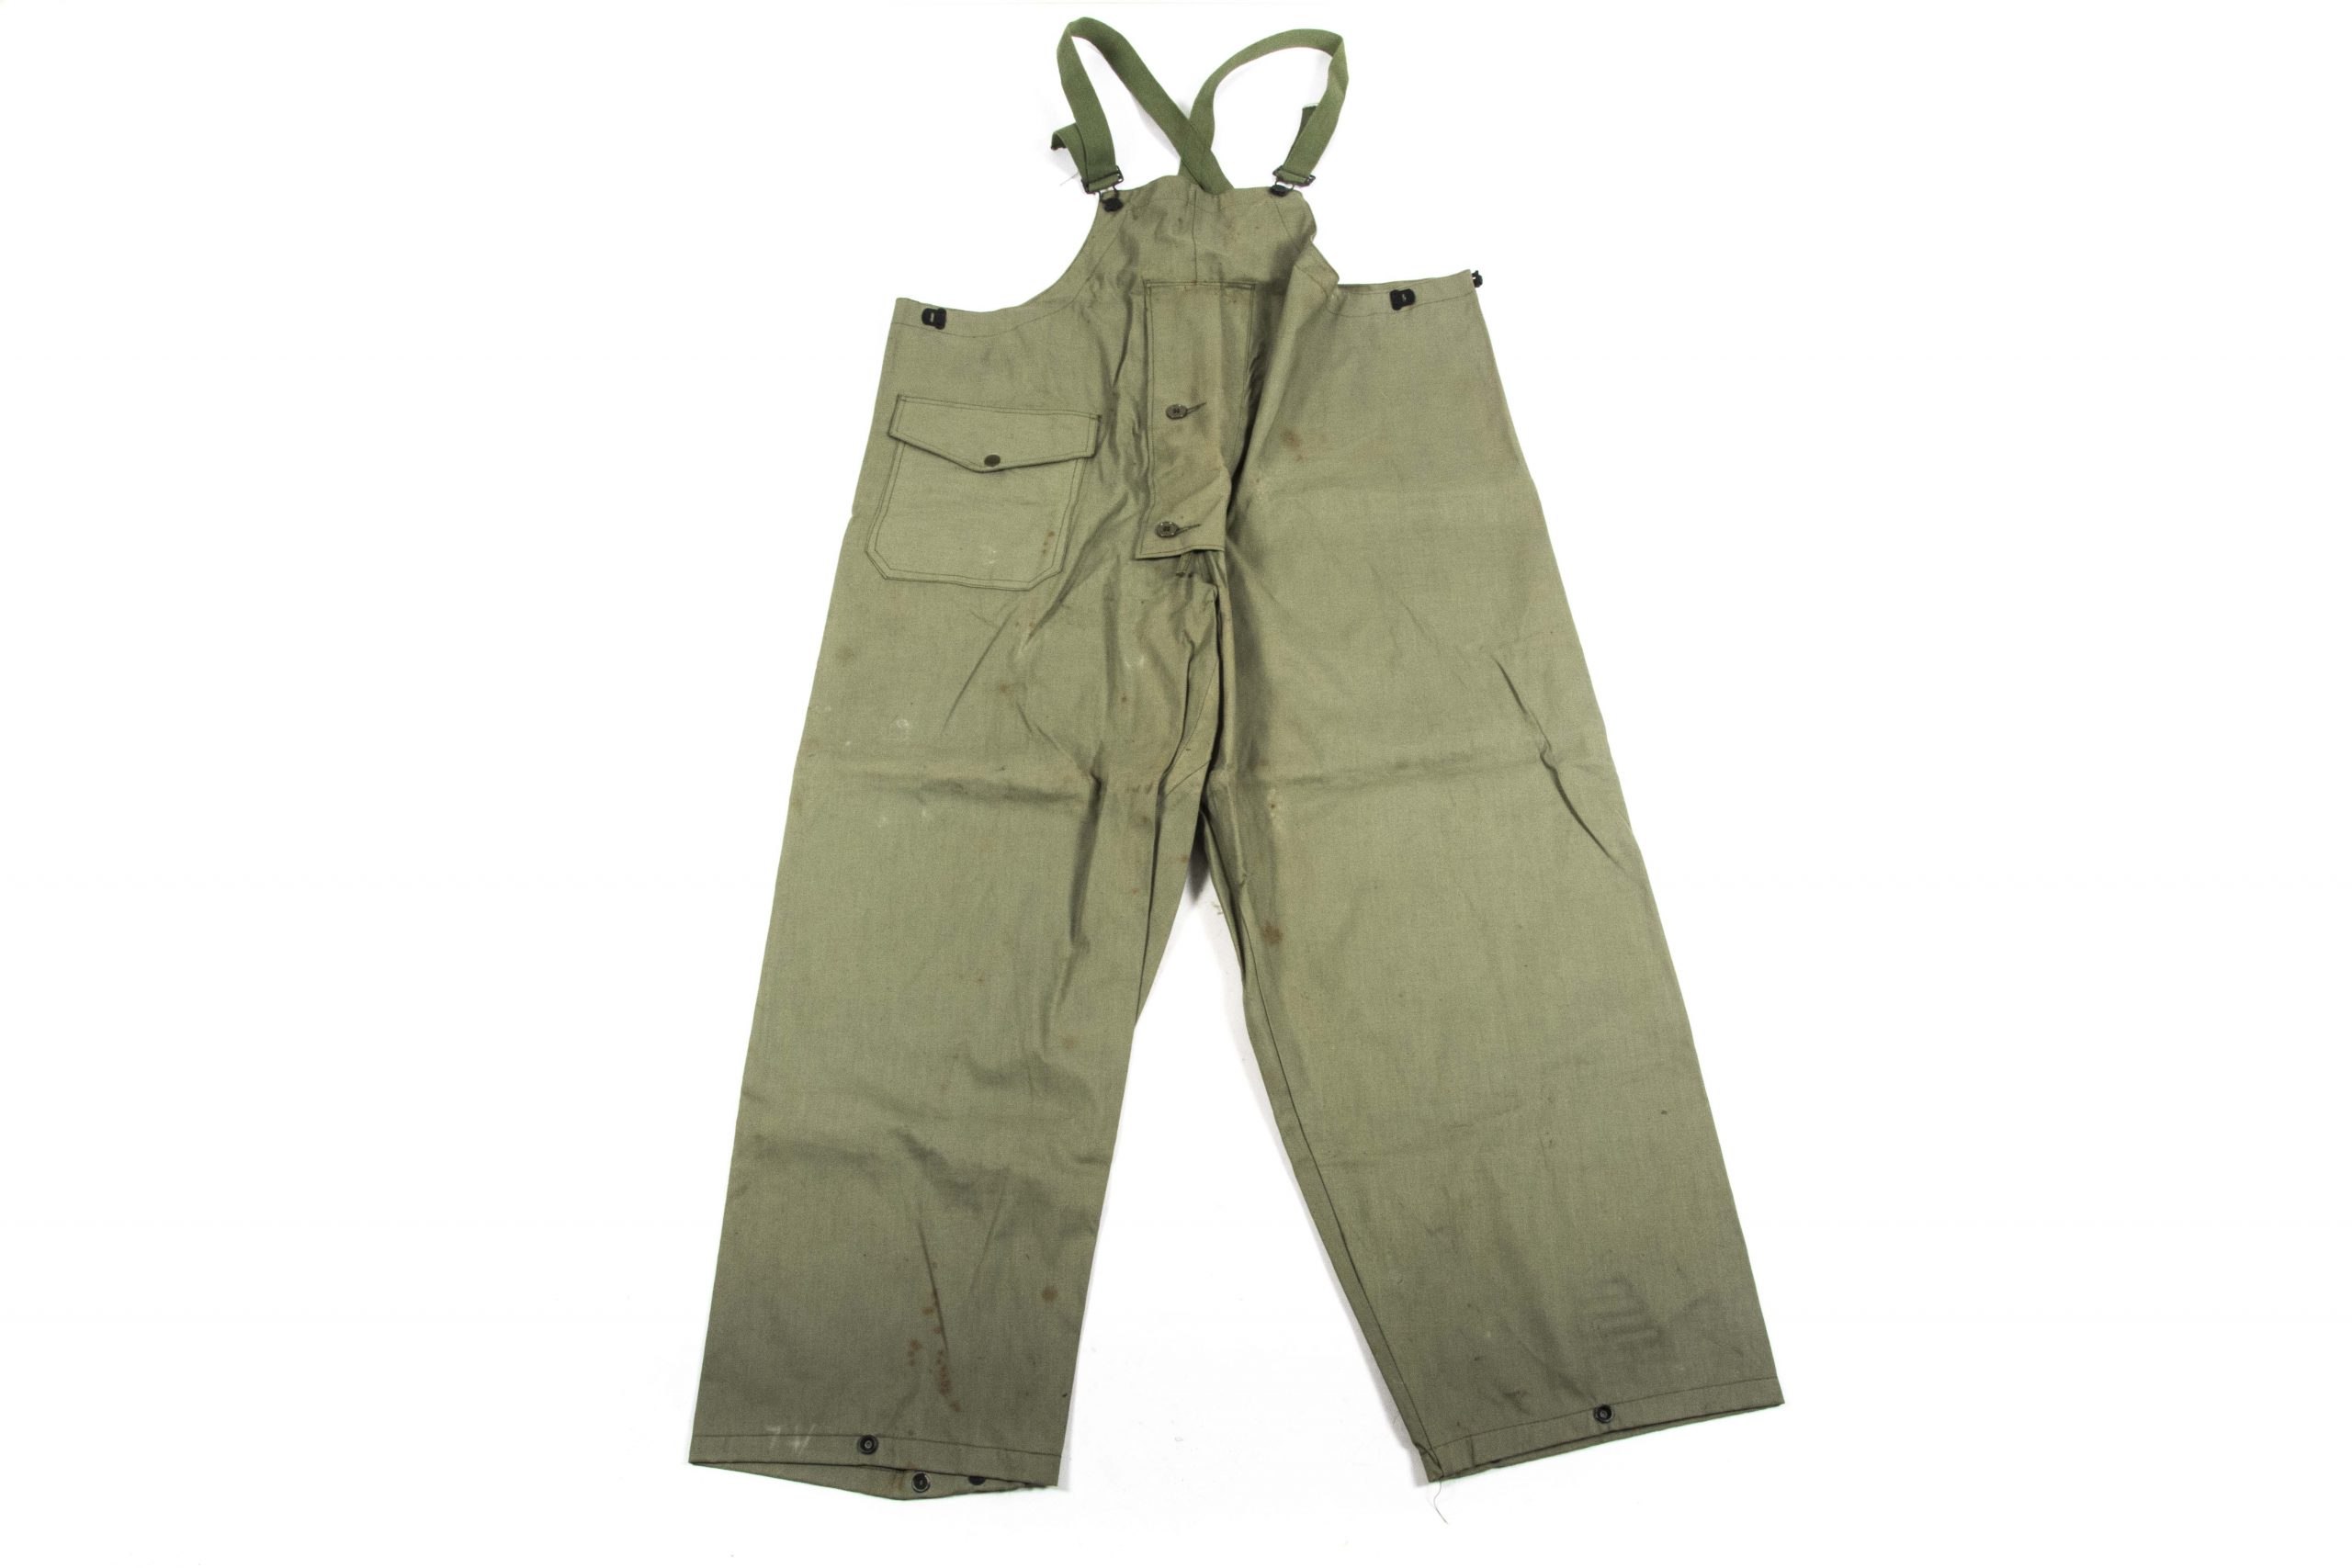 www.militarysurplusworld.com | Army Navy Surplus - Tactical | Big variety -  Cheap prices | Military Surplus, Clothing, Law Enforcement, Boots, Outdoor  & Tactical Gear